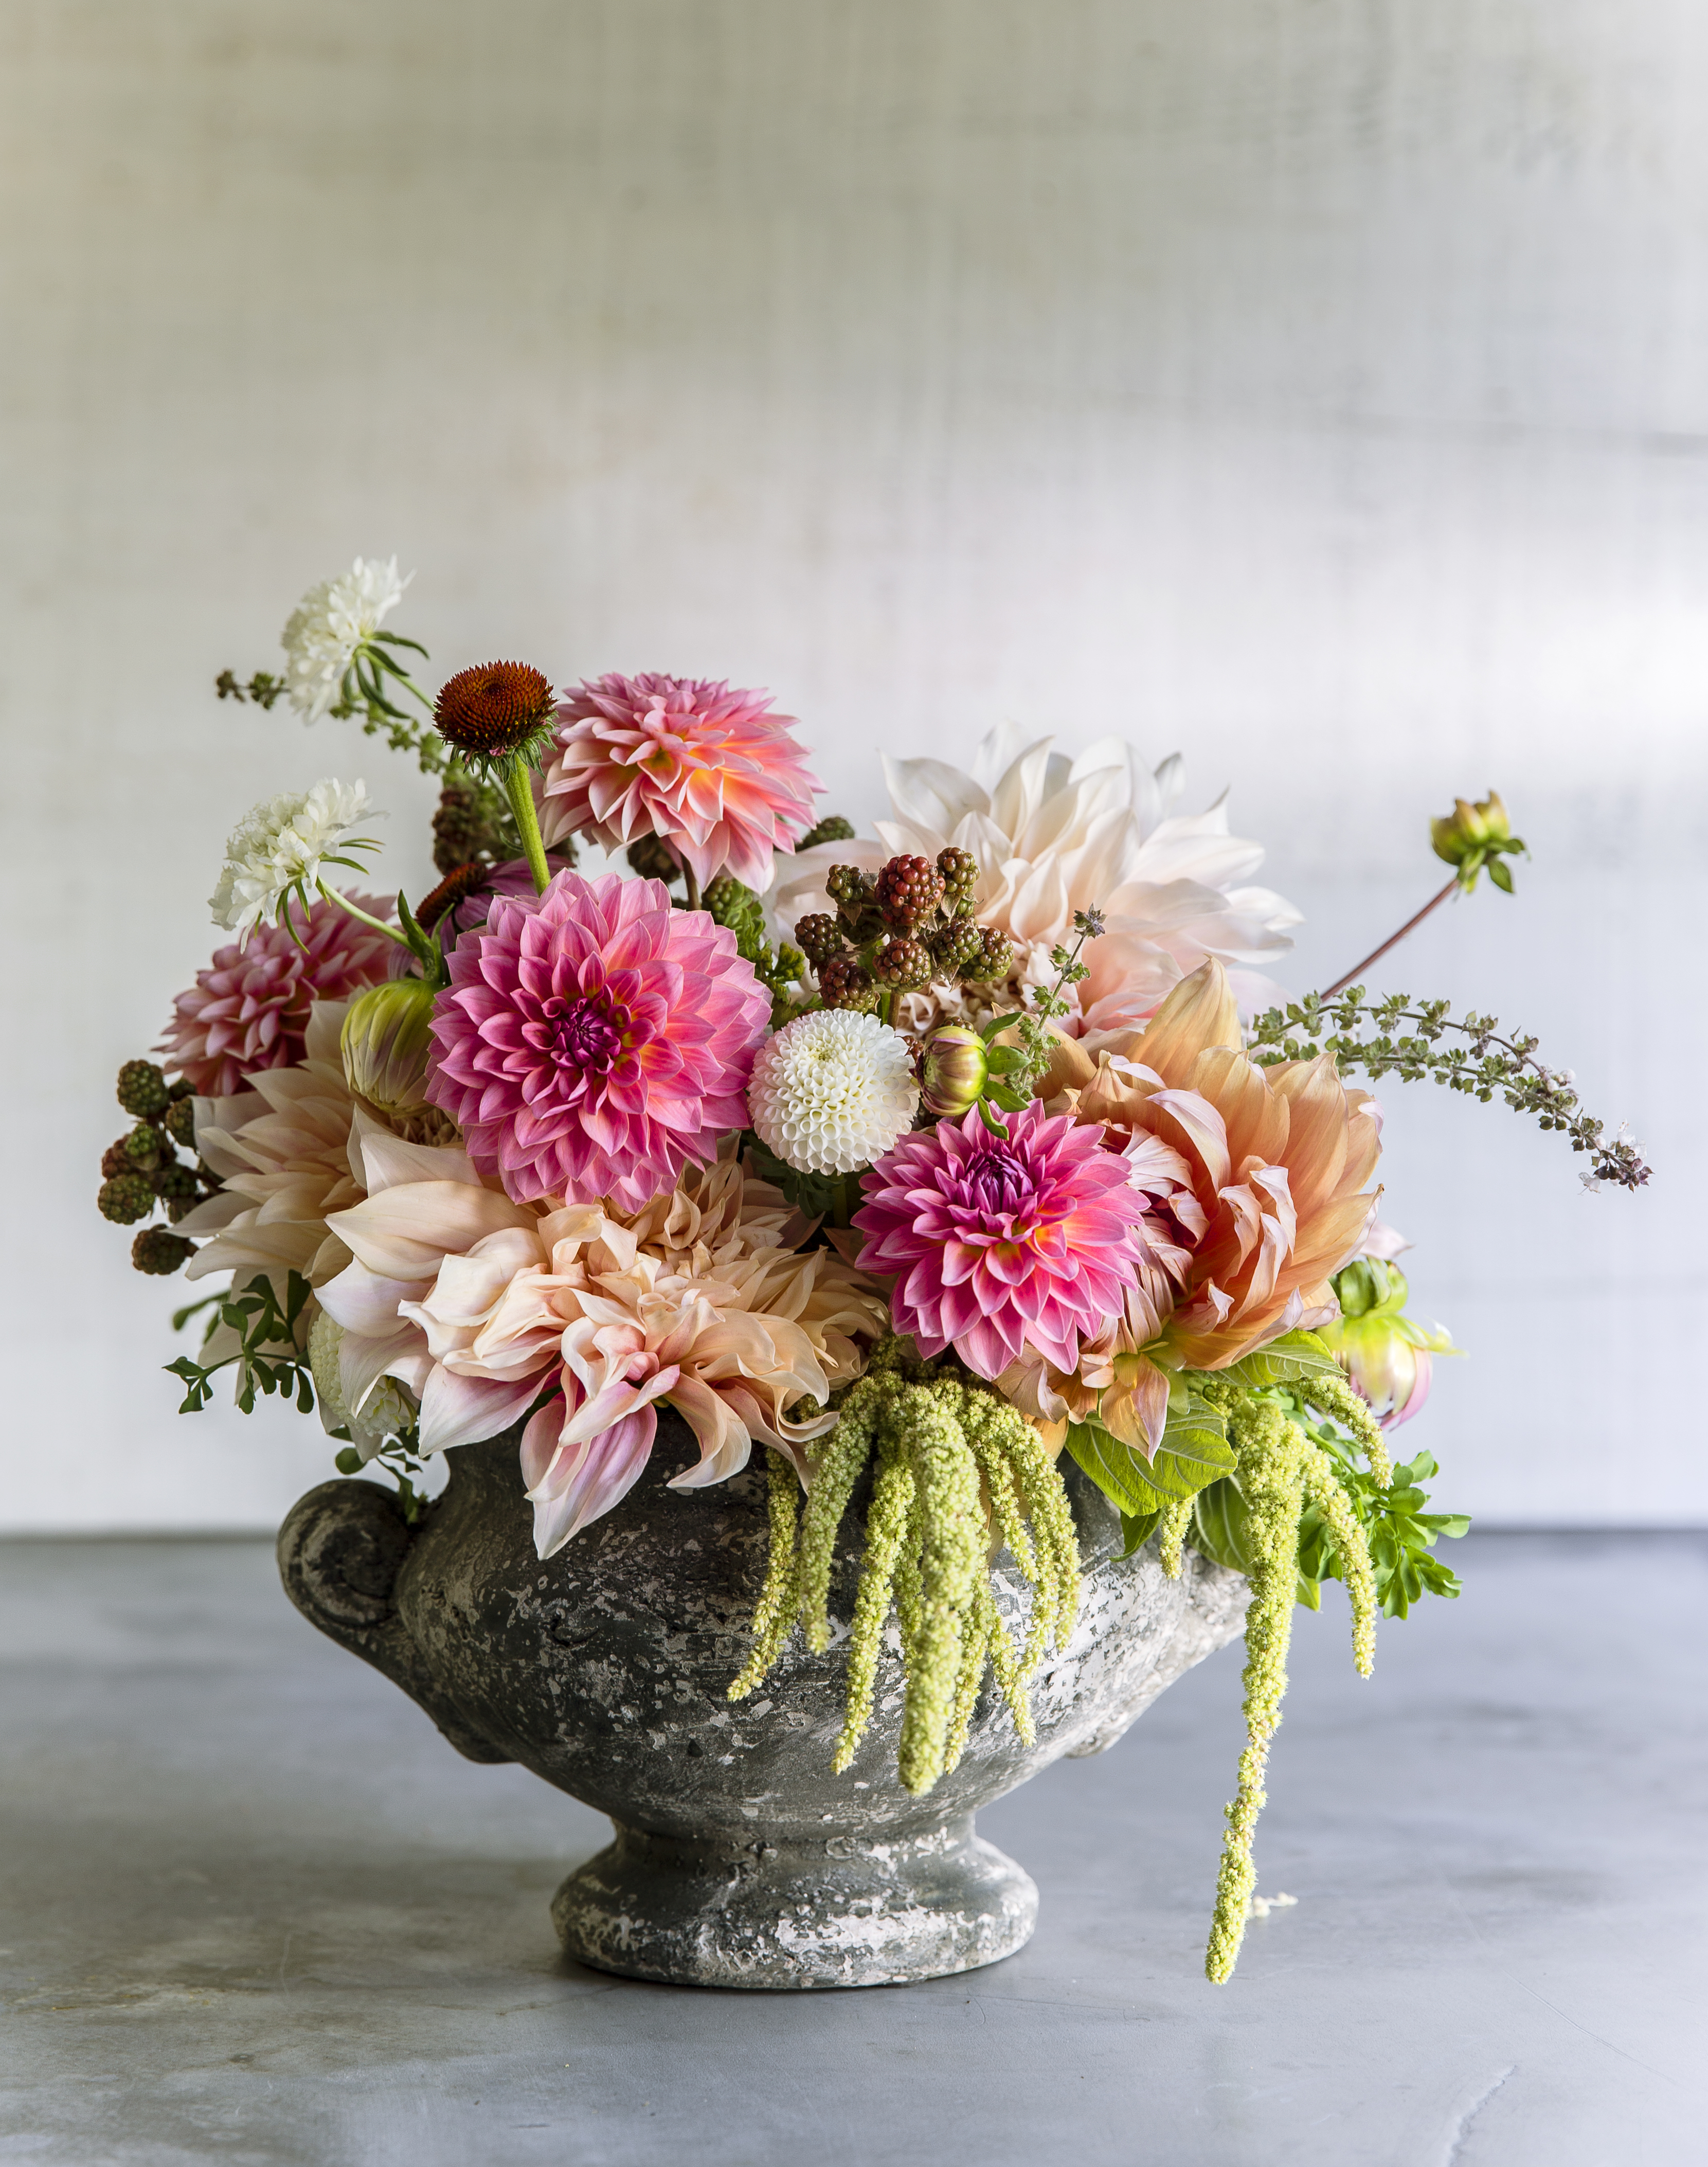 10 Sweet Ideas for Mother's Day Flowers - Sunset Magazine